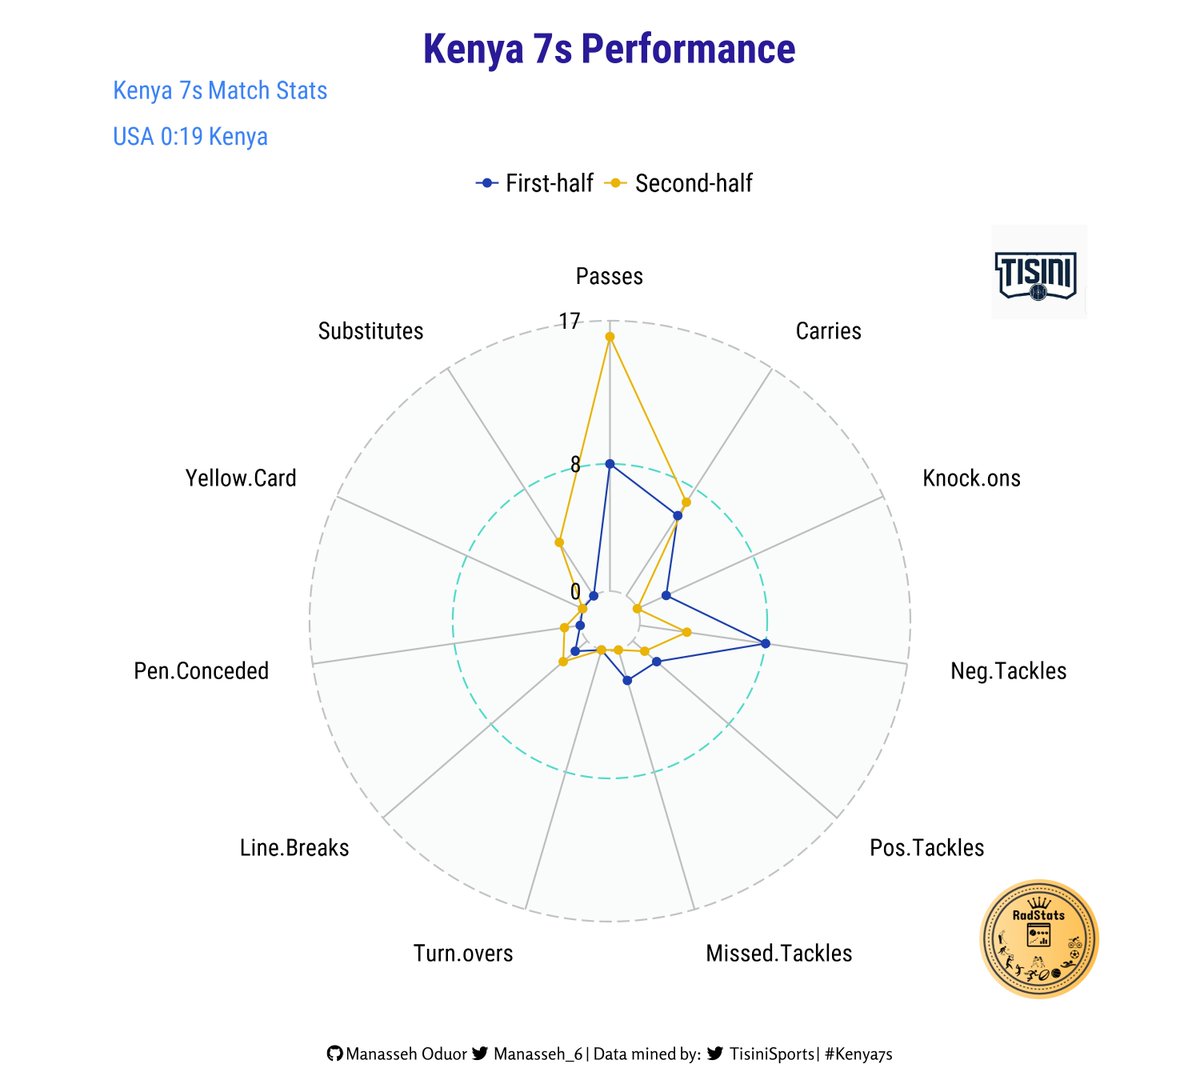 The #Kenya7s displayed best performance by fortifying their defense in the 2nd half, reducing missed tackles & minimizing errors like knock-ons. They gained more possession & linebreaks and executed effective tactics for a decisive victory against the USA at #Toulouse7s.

#rstats